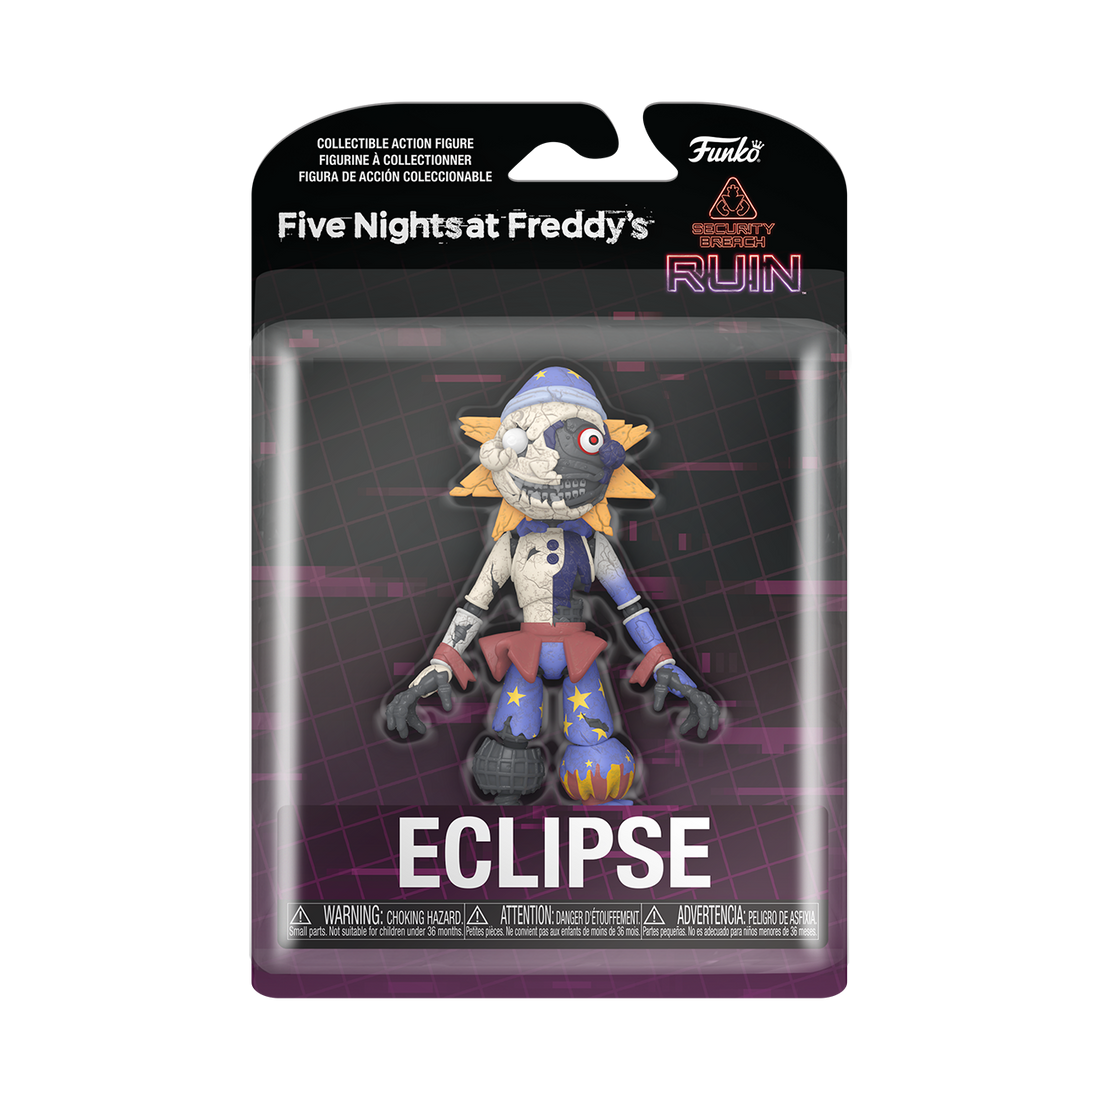 Five Nights at Freddy's Eclipse Action Figure Funko